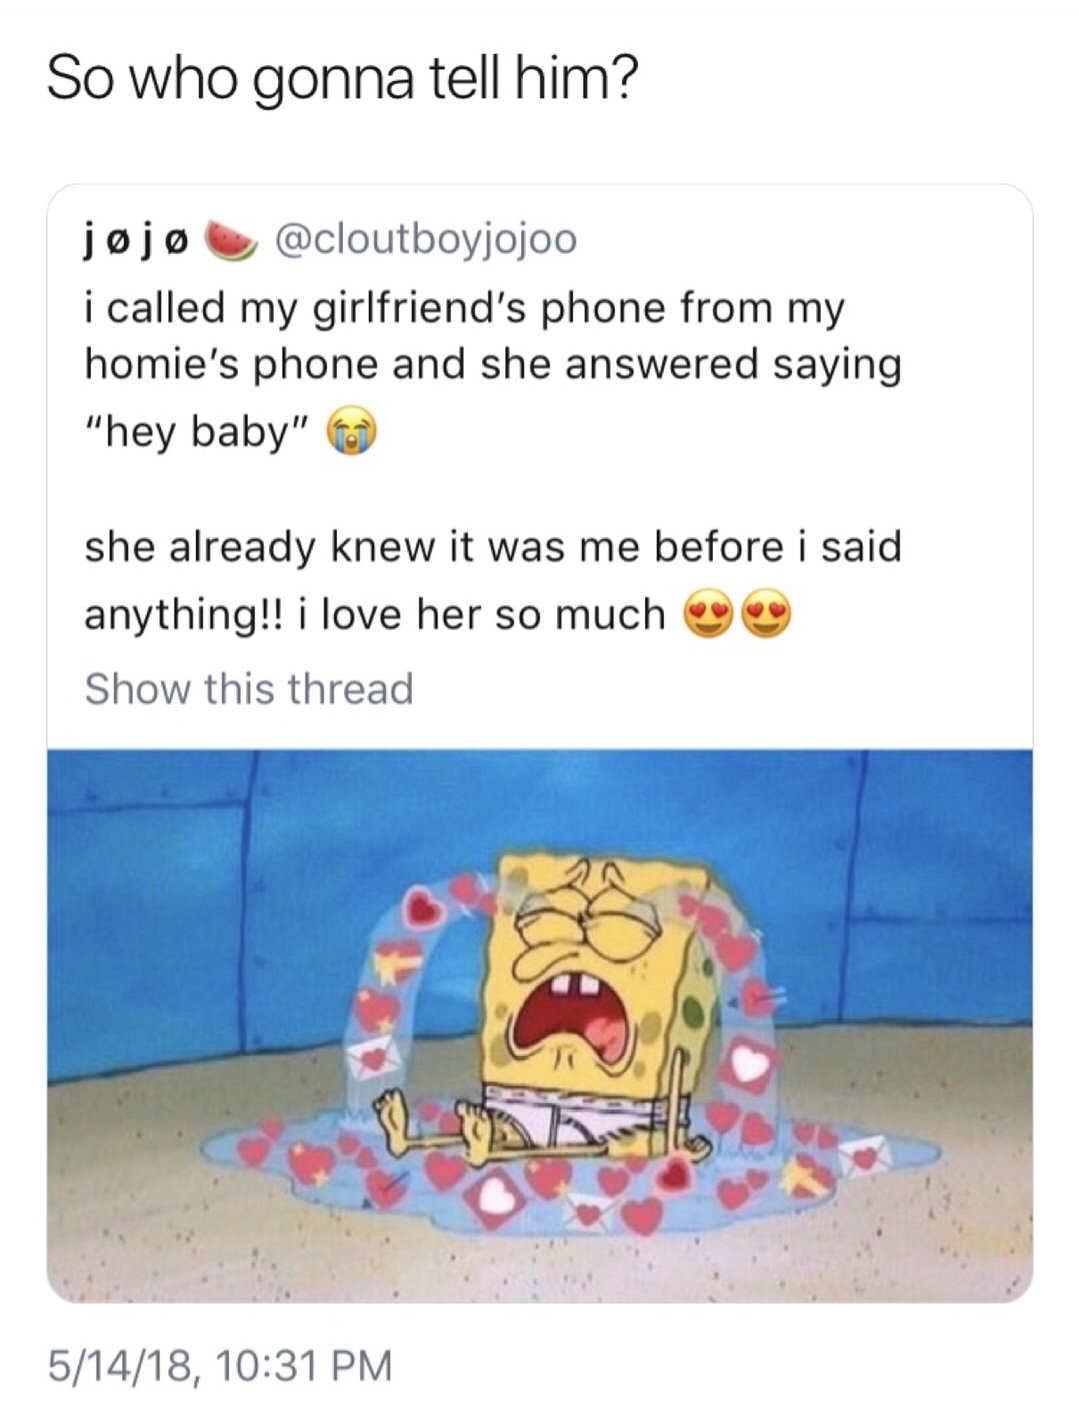 heart sad spongebob meme - So who gonna tell him? j j i called my girlfriend's phone from my homie's phone and she answered saying "hey baby" she already knew it was me before i said anything!! i love her so much Show this thread 51418,